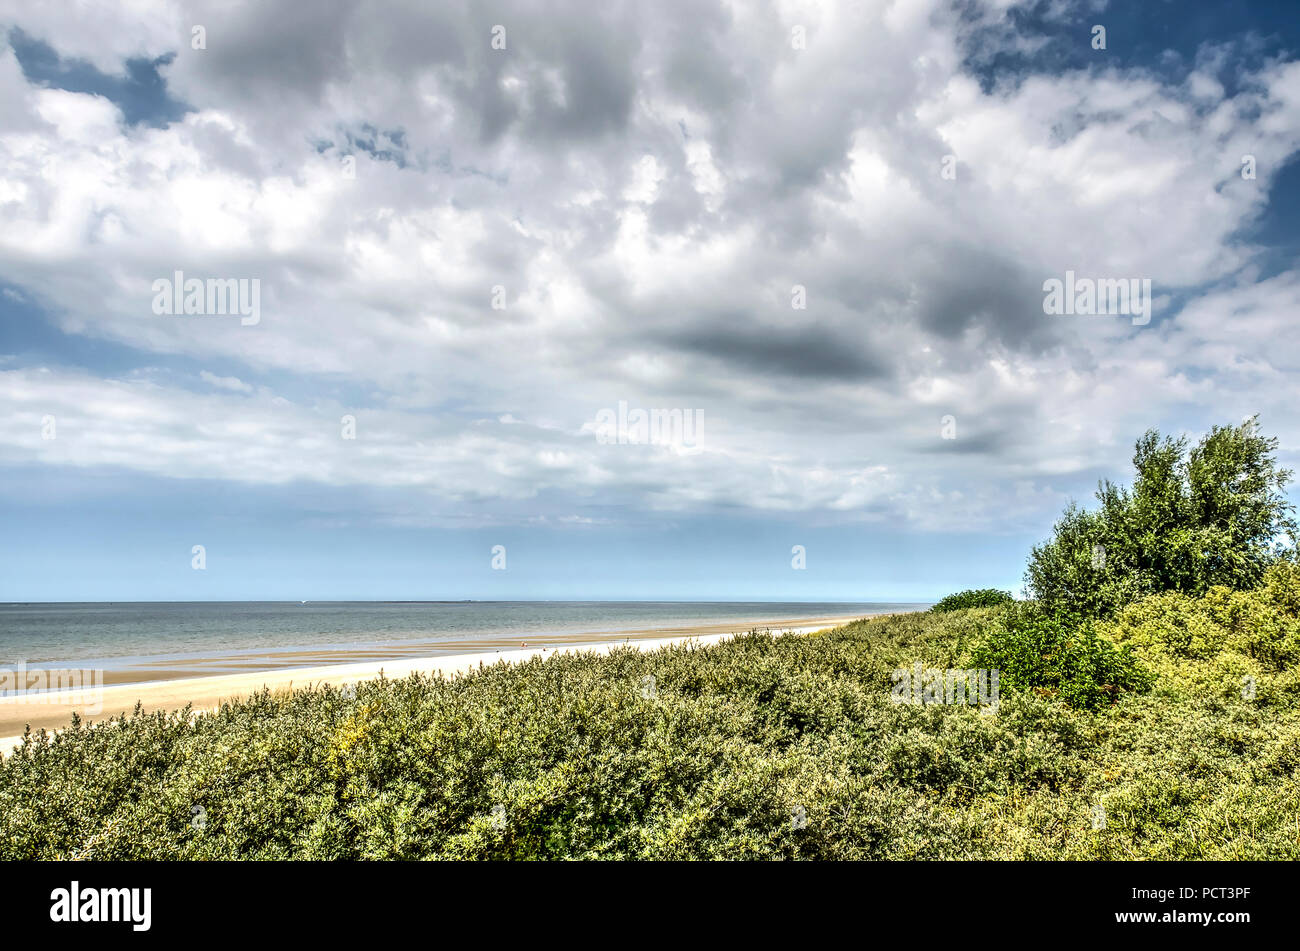 Spectacular cloud formations over the Northsea beach and adjacent dunes near Rockanje, The Netherlands Stock Photo